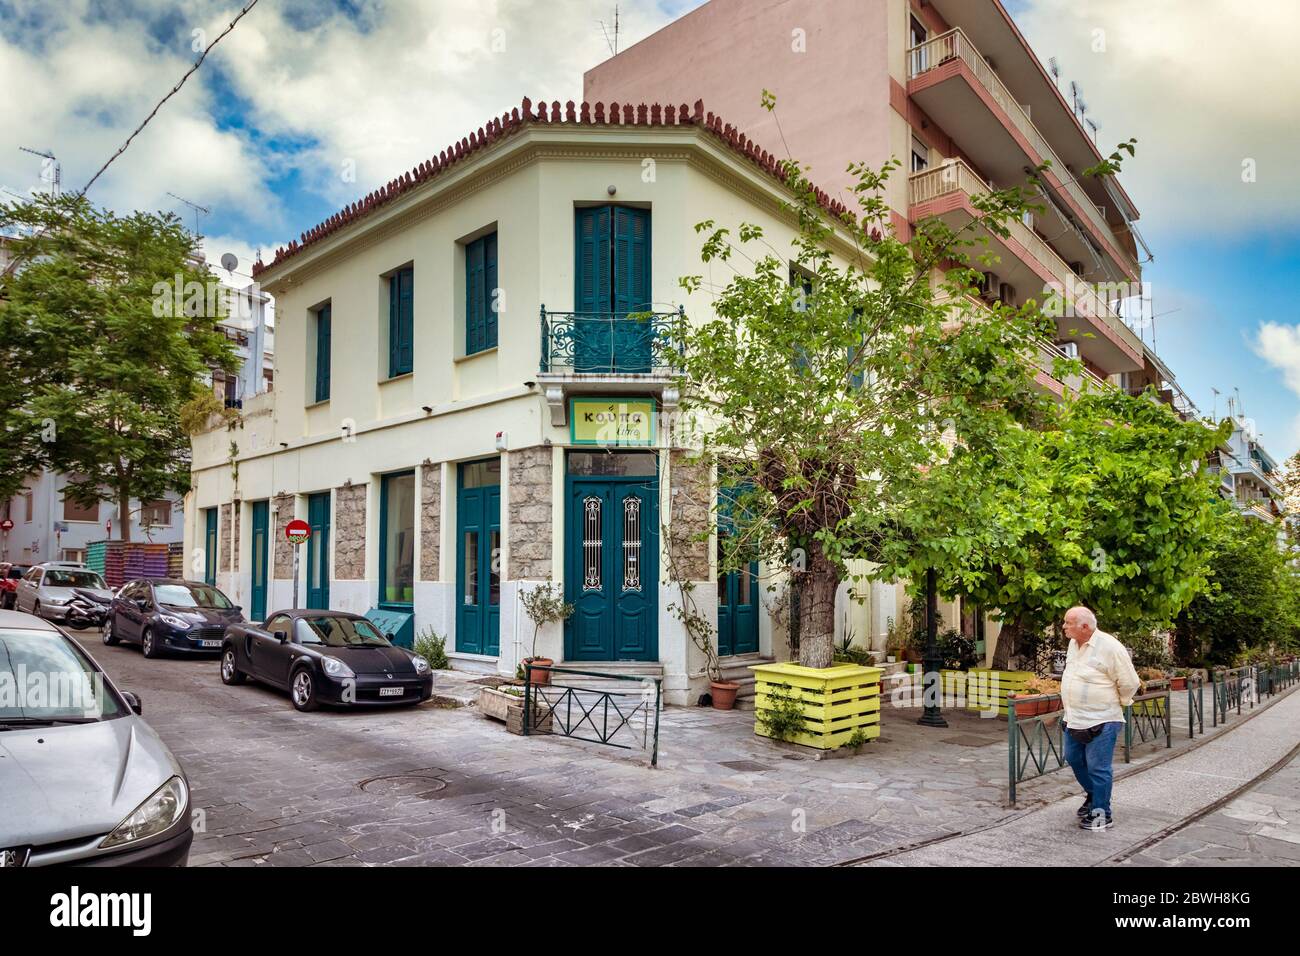 Closed taverna at Akteou and Iraklidon St in Thissio, Athens. Stock Photo